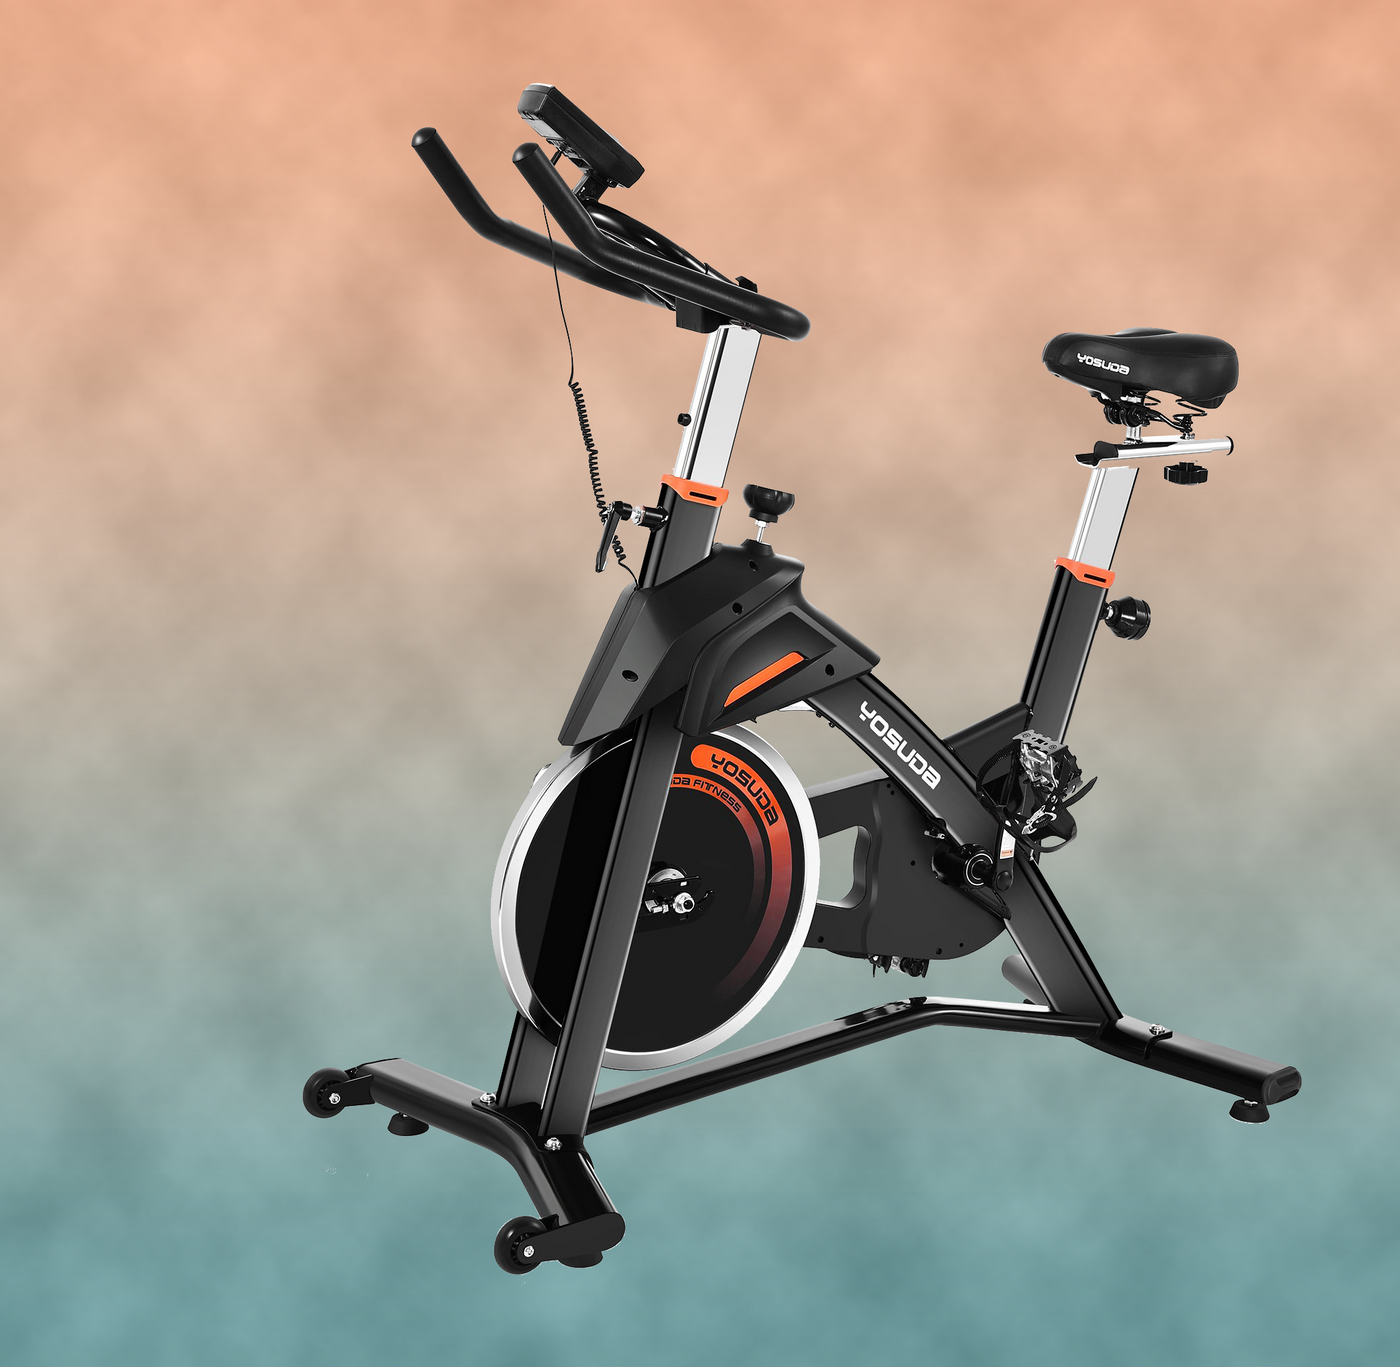 Yosuda Indoor Stationary Bike & Magnetic Under Desk Bike. Smooth, durable and easy to maintain indoor bikes for family fitness and a healthy life. Efficient shipping and delivery to ensure your product experience, and get your favorite gym equipment.